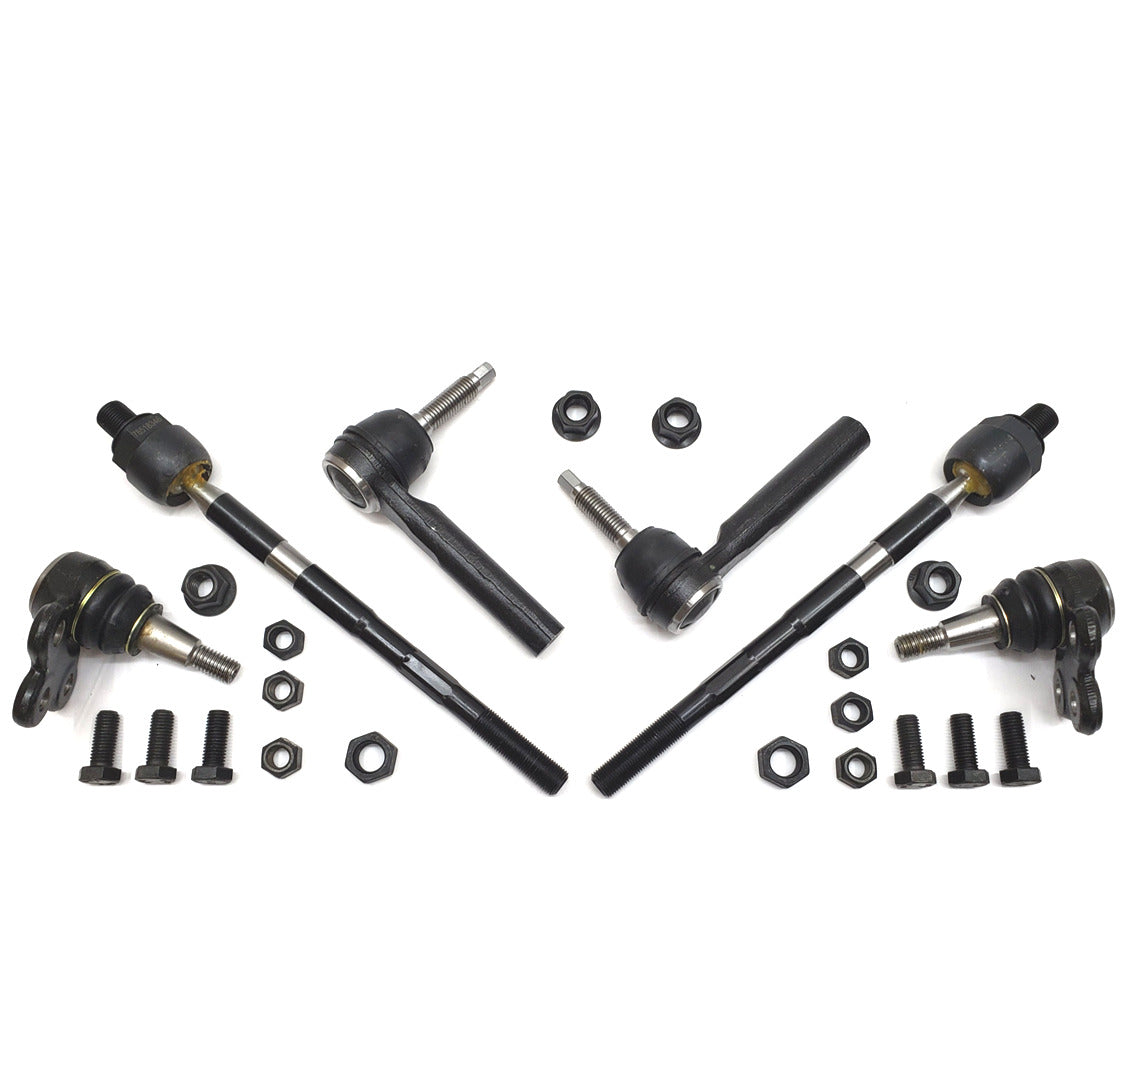 Lifetime Ball Joint Tie Rod Steering Kit for 2007-2016 GMC Acadia 2WD, AWD